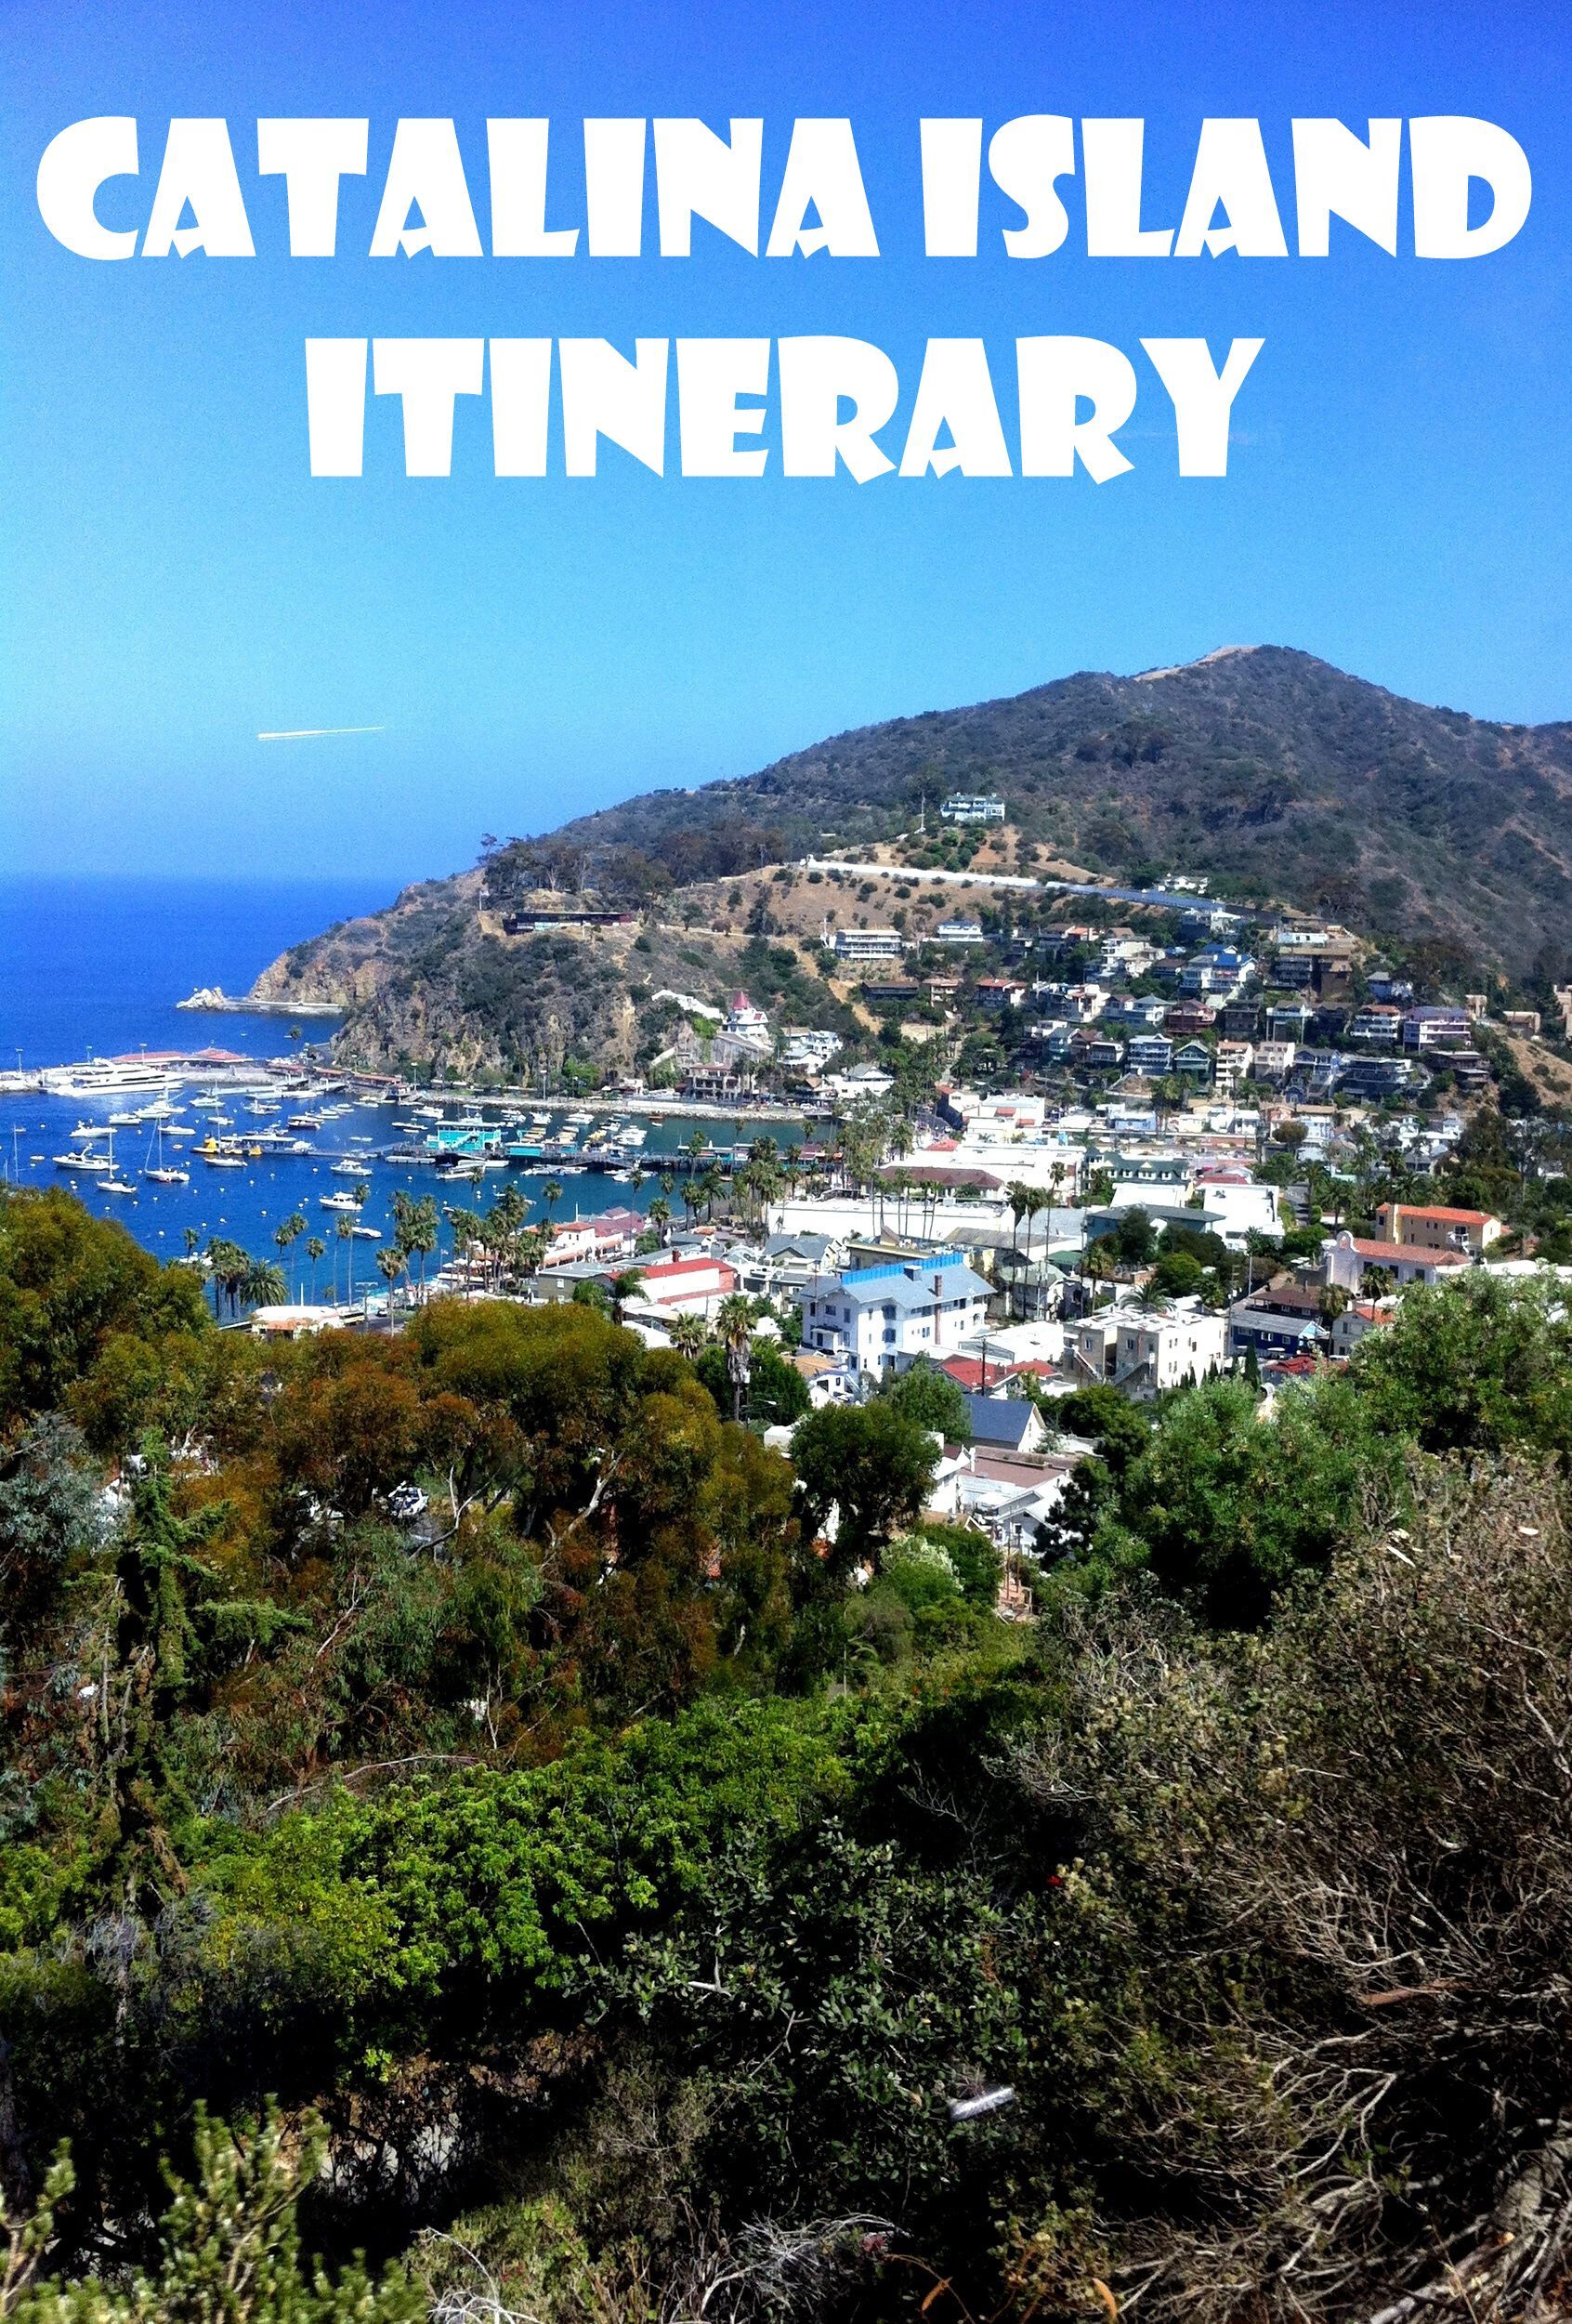 Planning a trip to Catalina Island?